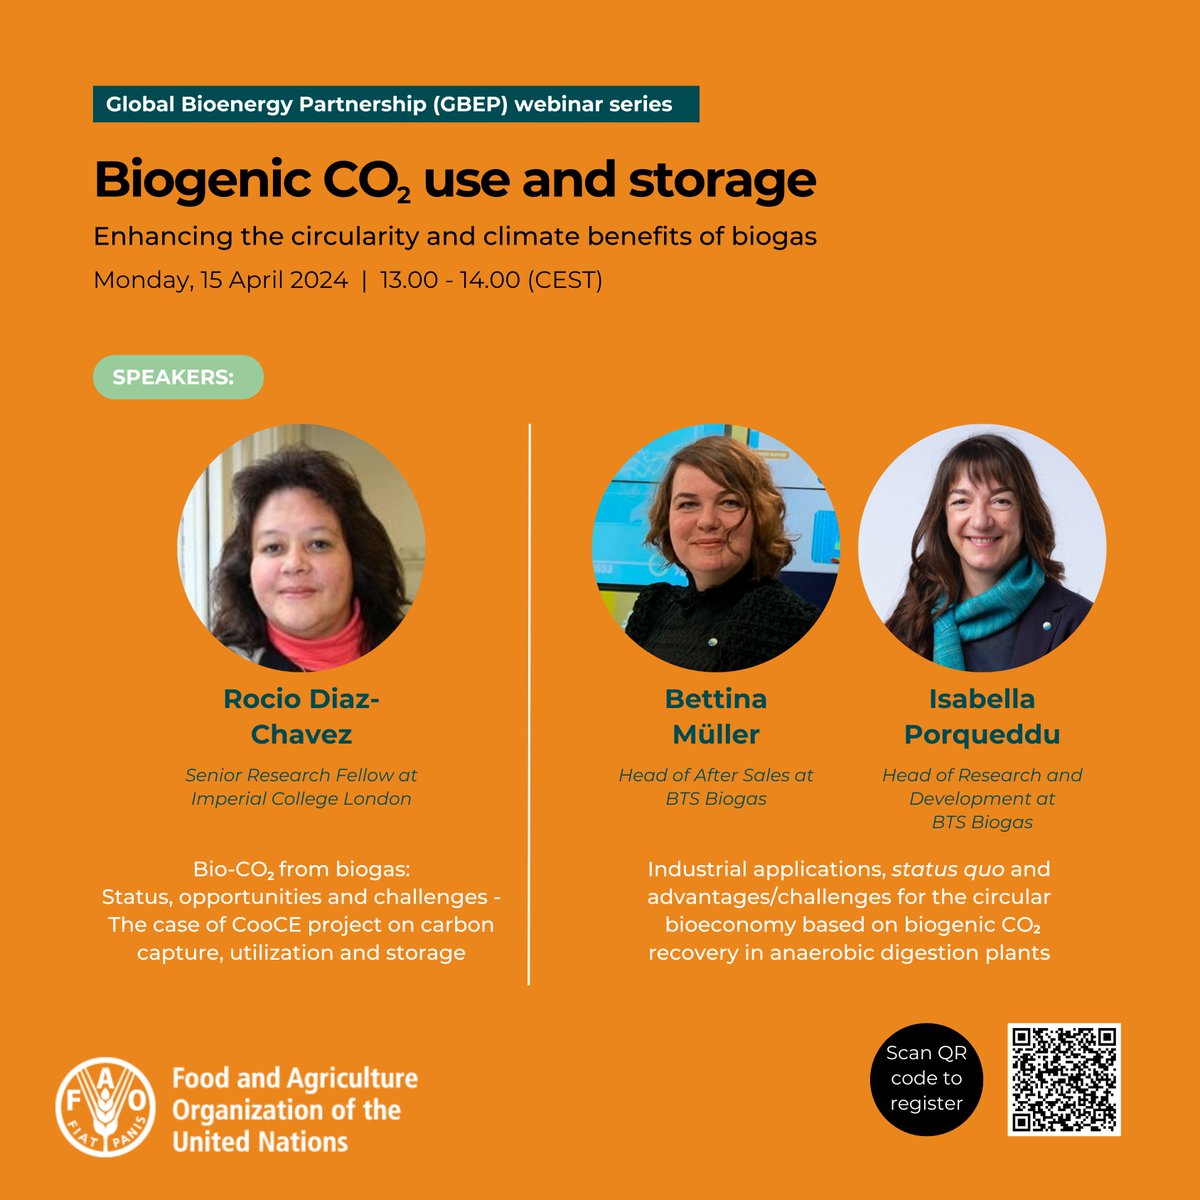 Meet our speakers for next week's webinar on bio-CO2!

Register & learn from industry experts as they delve into the potentials of bio-CO2 produced in the biogas industry for carbon capture, utilization & storage 👇

bit.ly/3vK9594

#ClimateAction #ForNature